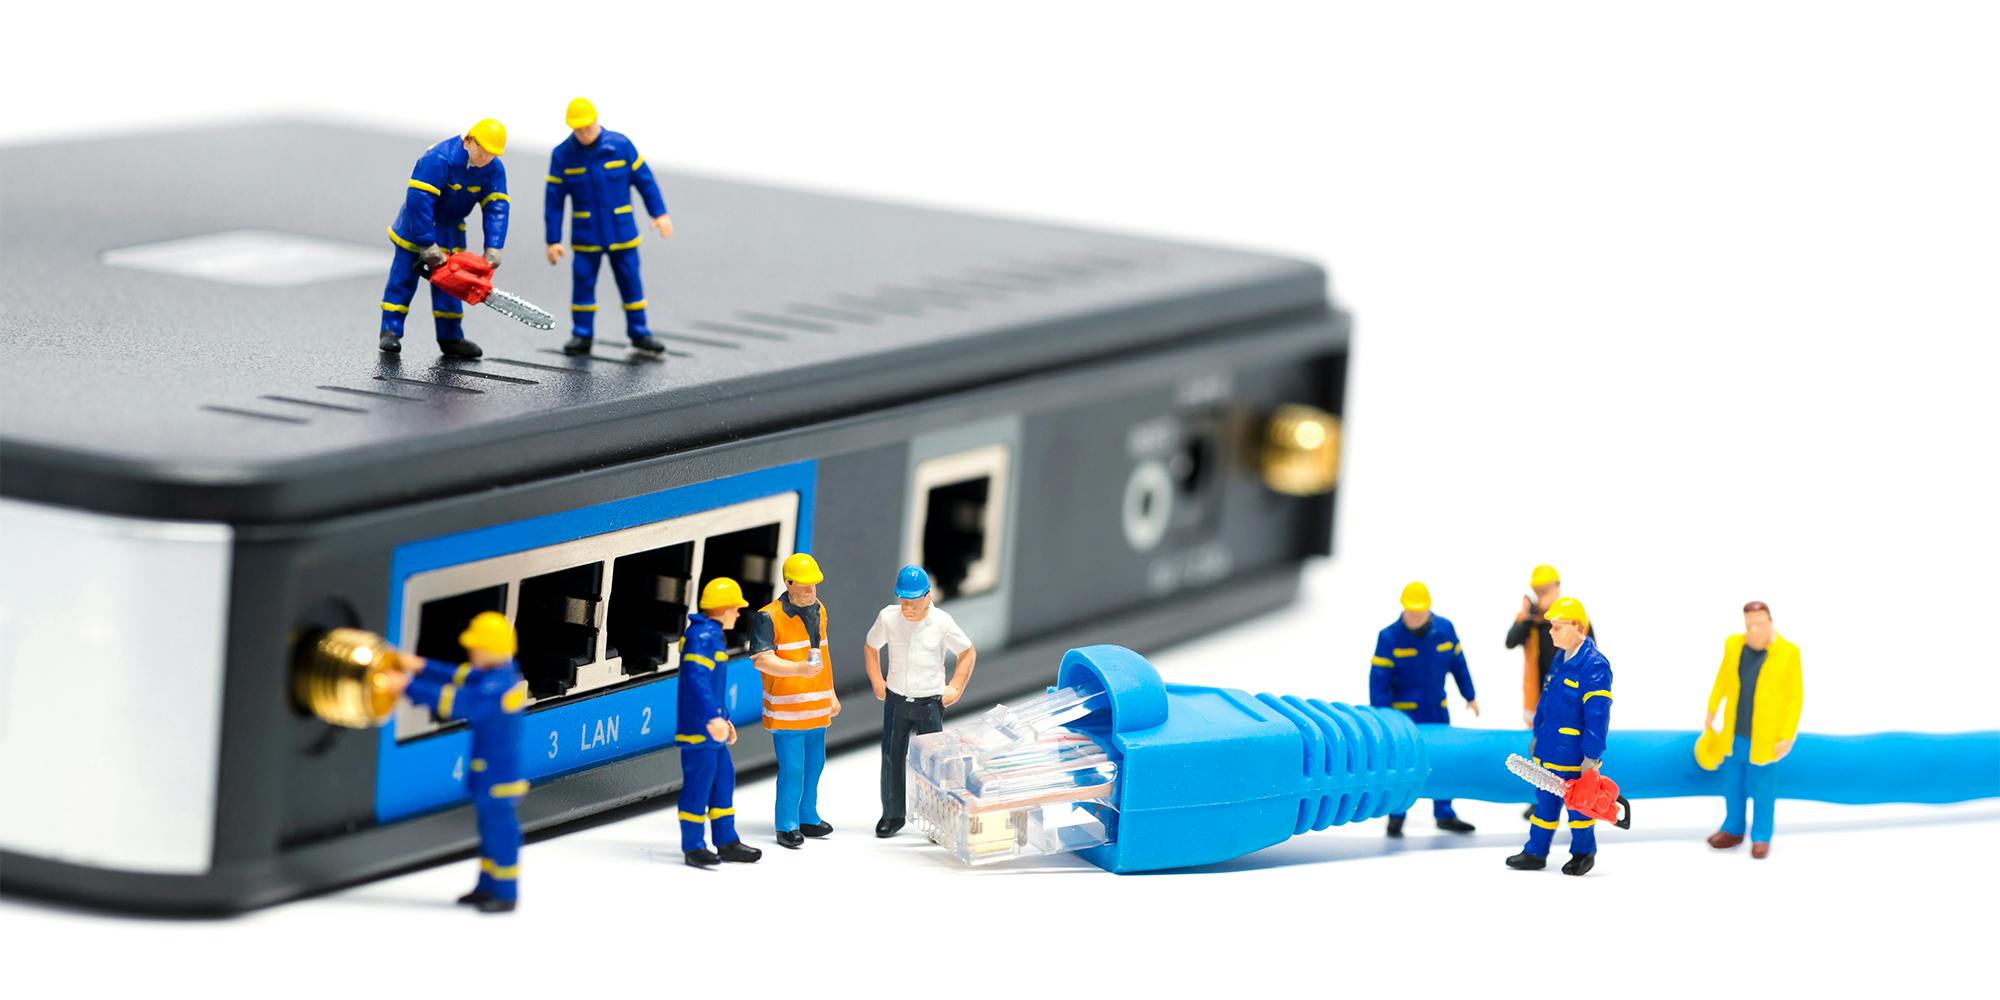 Tiny statues installing broadband cable into router